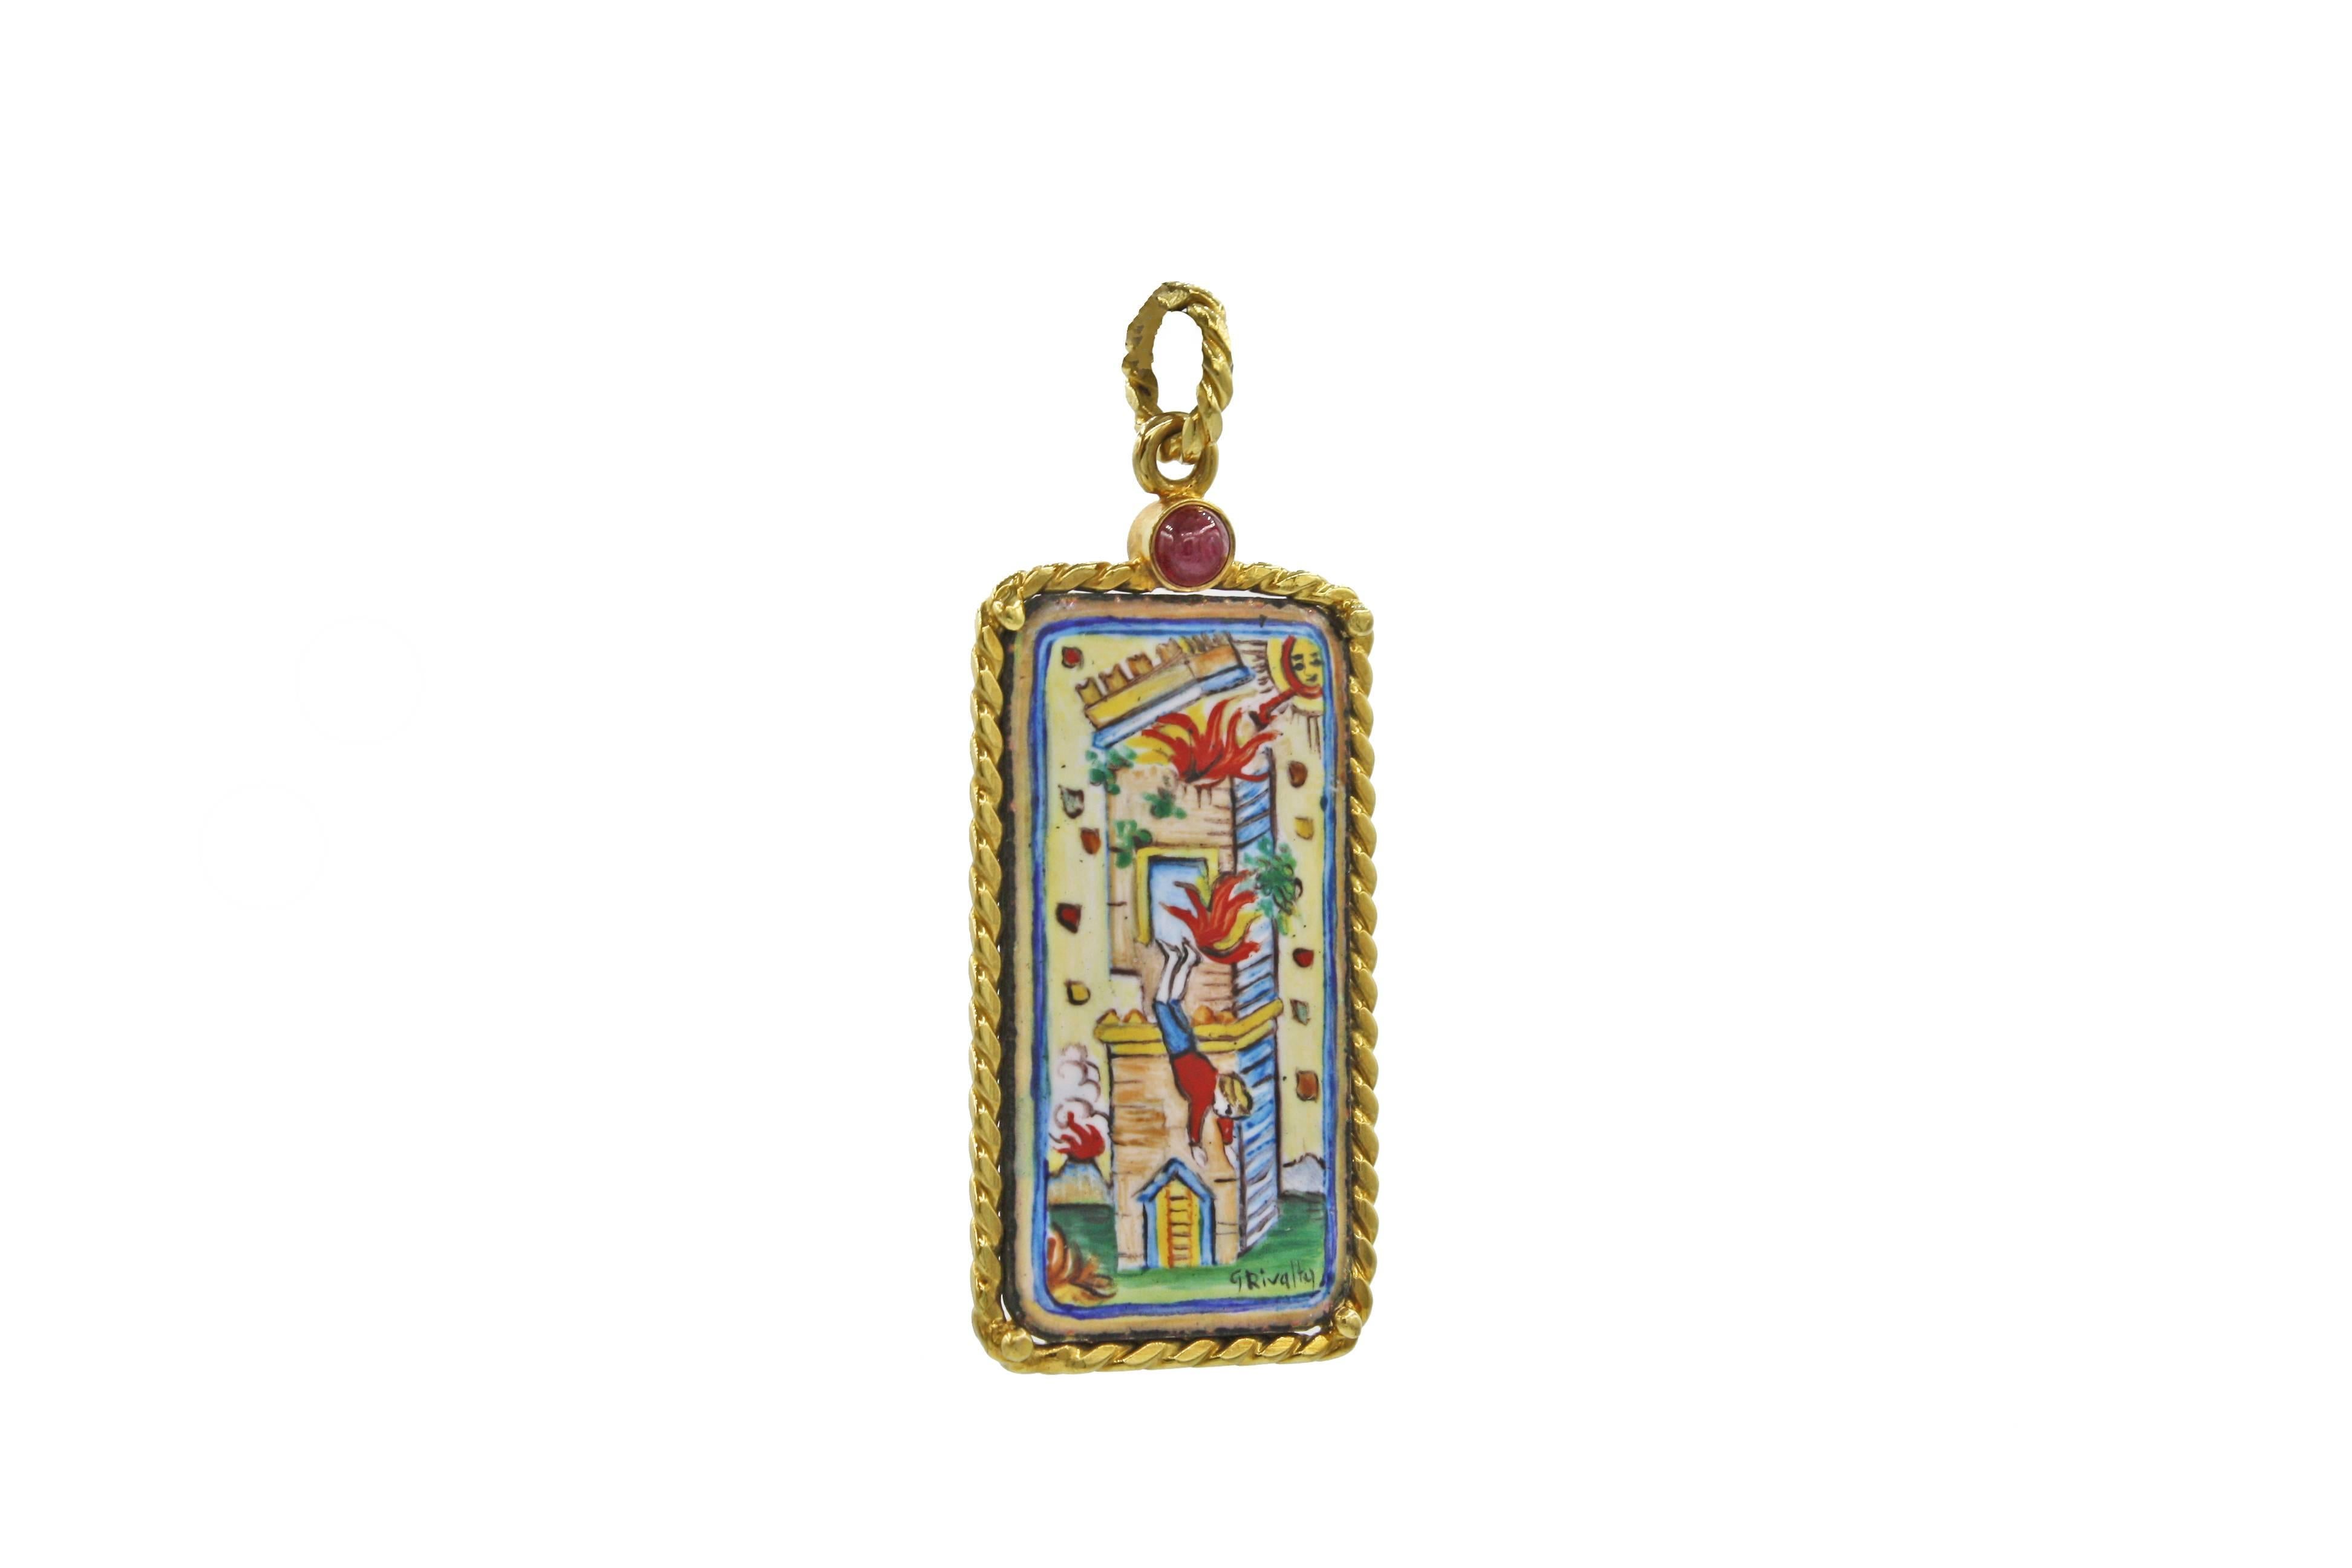 This rare, hand-painted enamel tarot card pendant is set in an 18kt gold frame with rope detailing.  Adding to its special qualities, there is a cabochon ruby set into the top of the pendant.  The tarot card pictured is the 